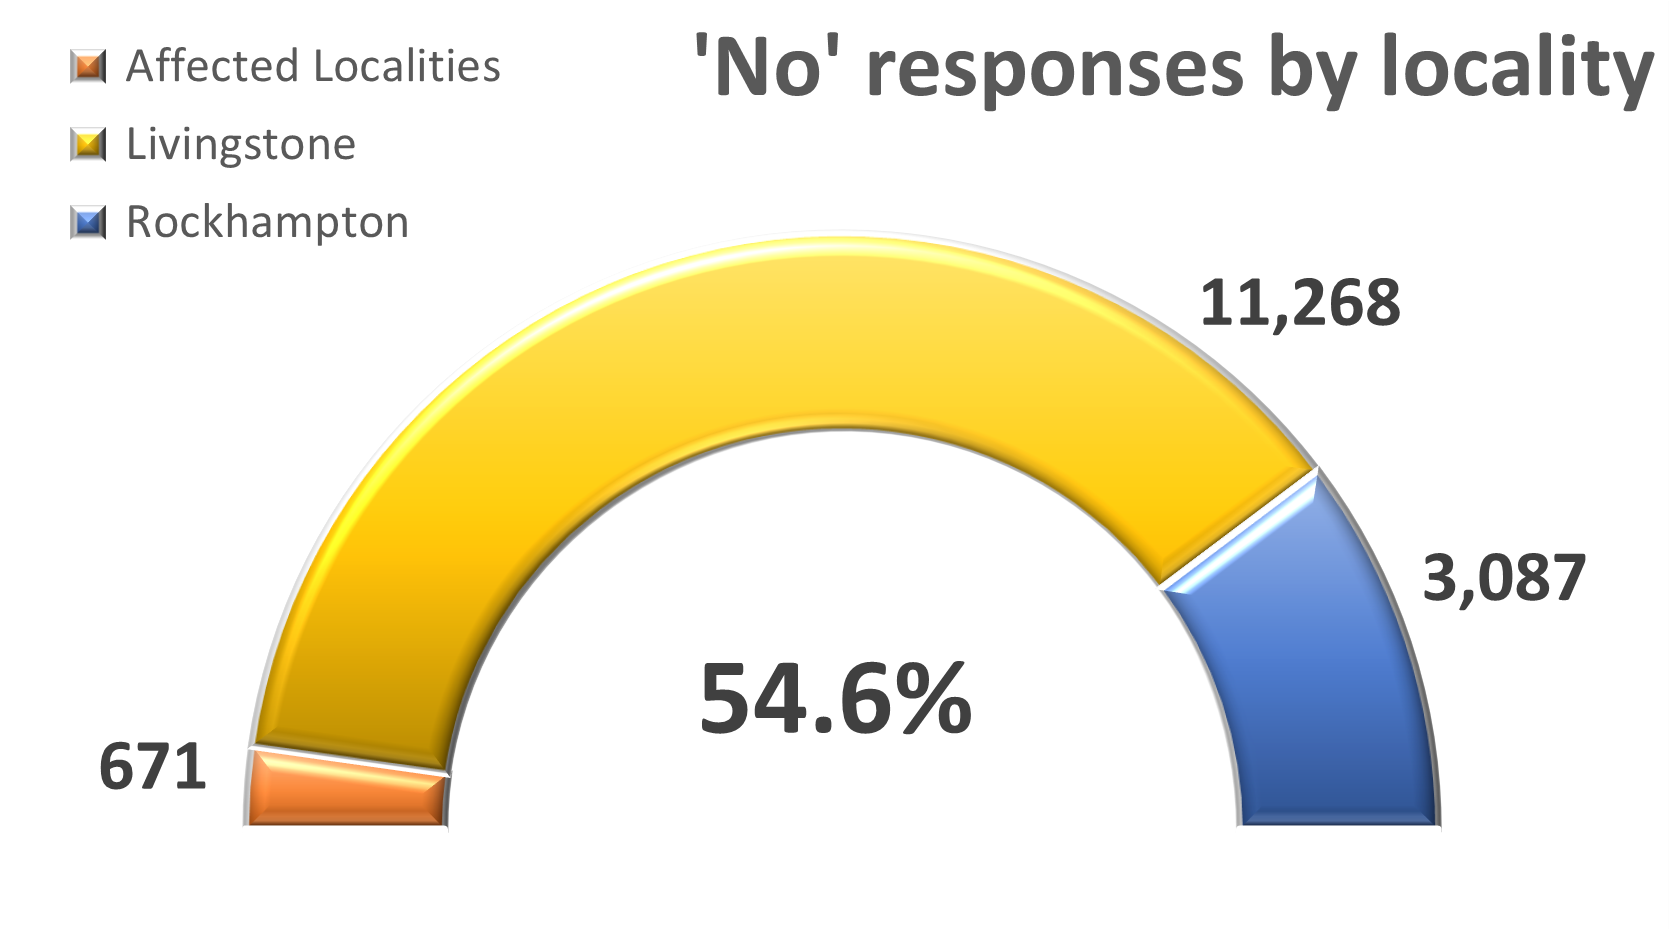 No responses by locality